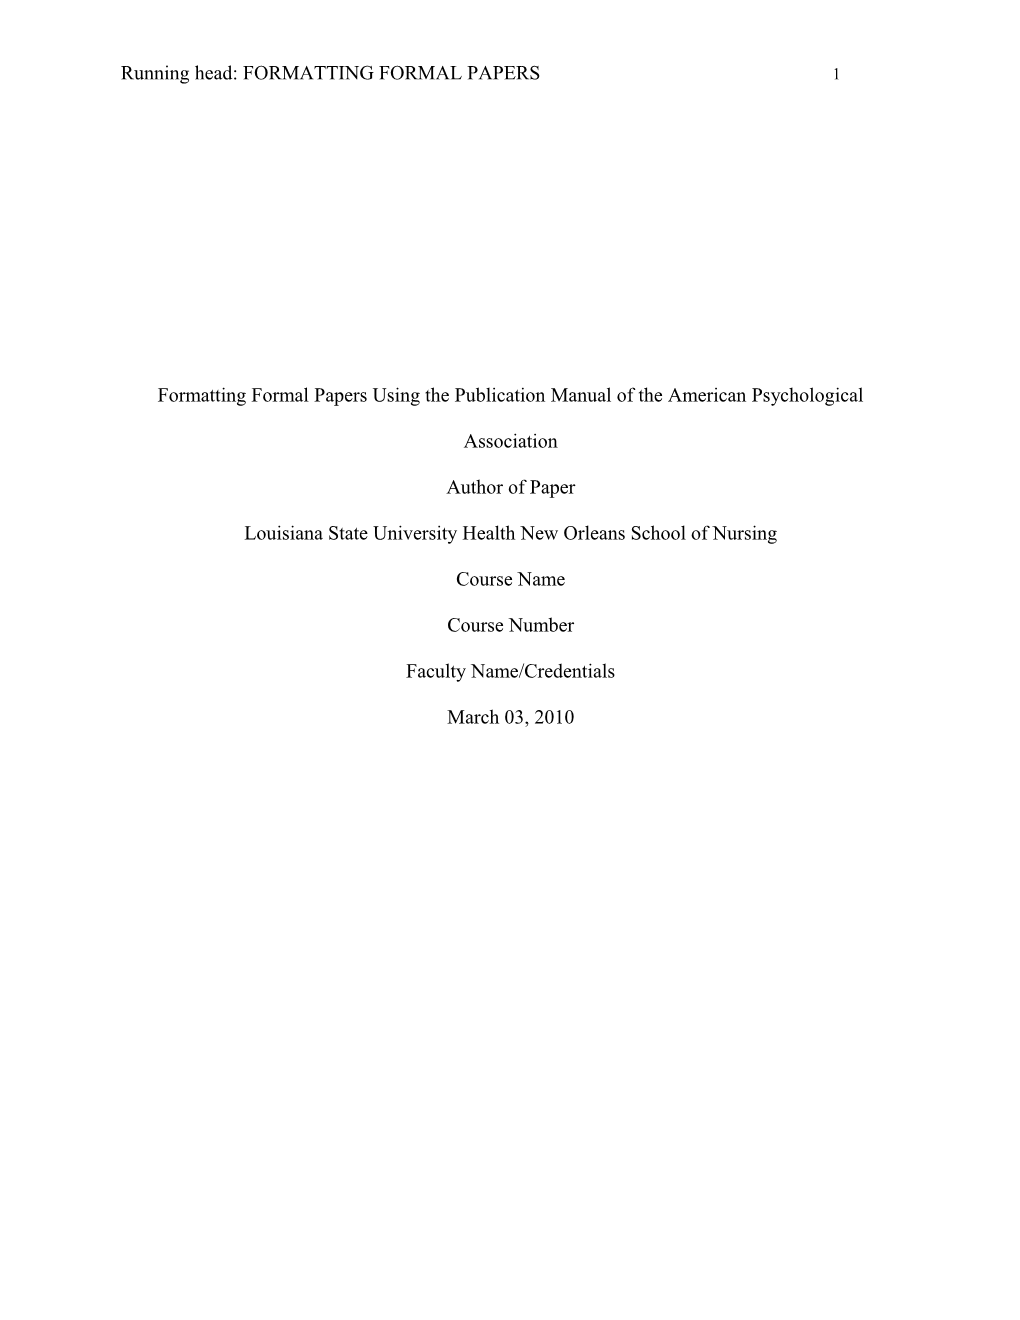 Formatting Formal Papers Using the Publication Manual of the American Psychological Association s1